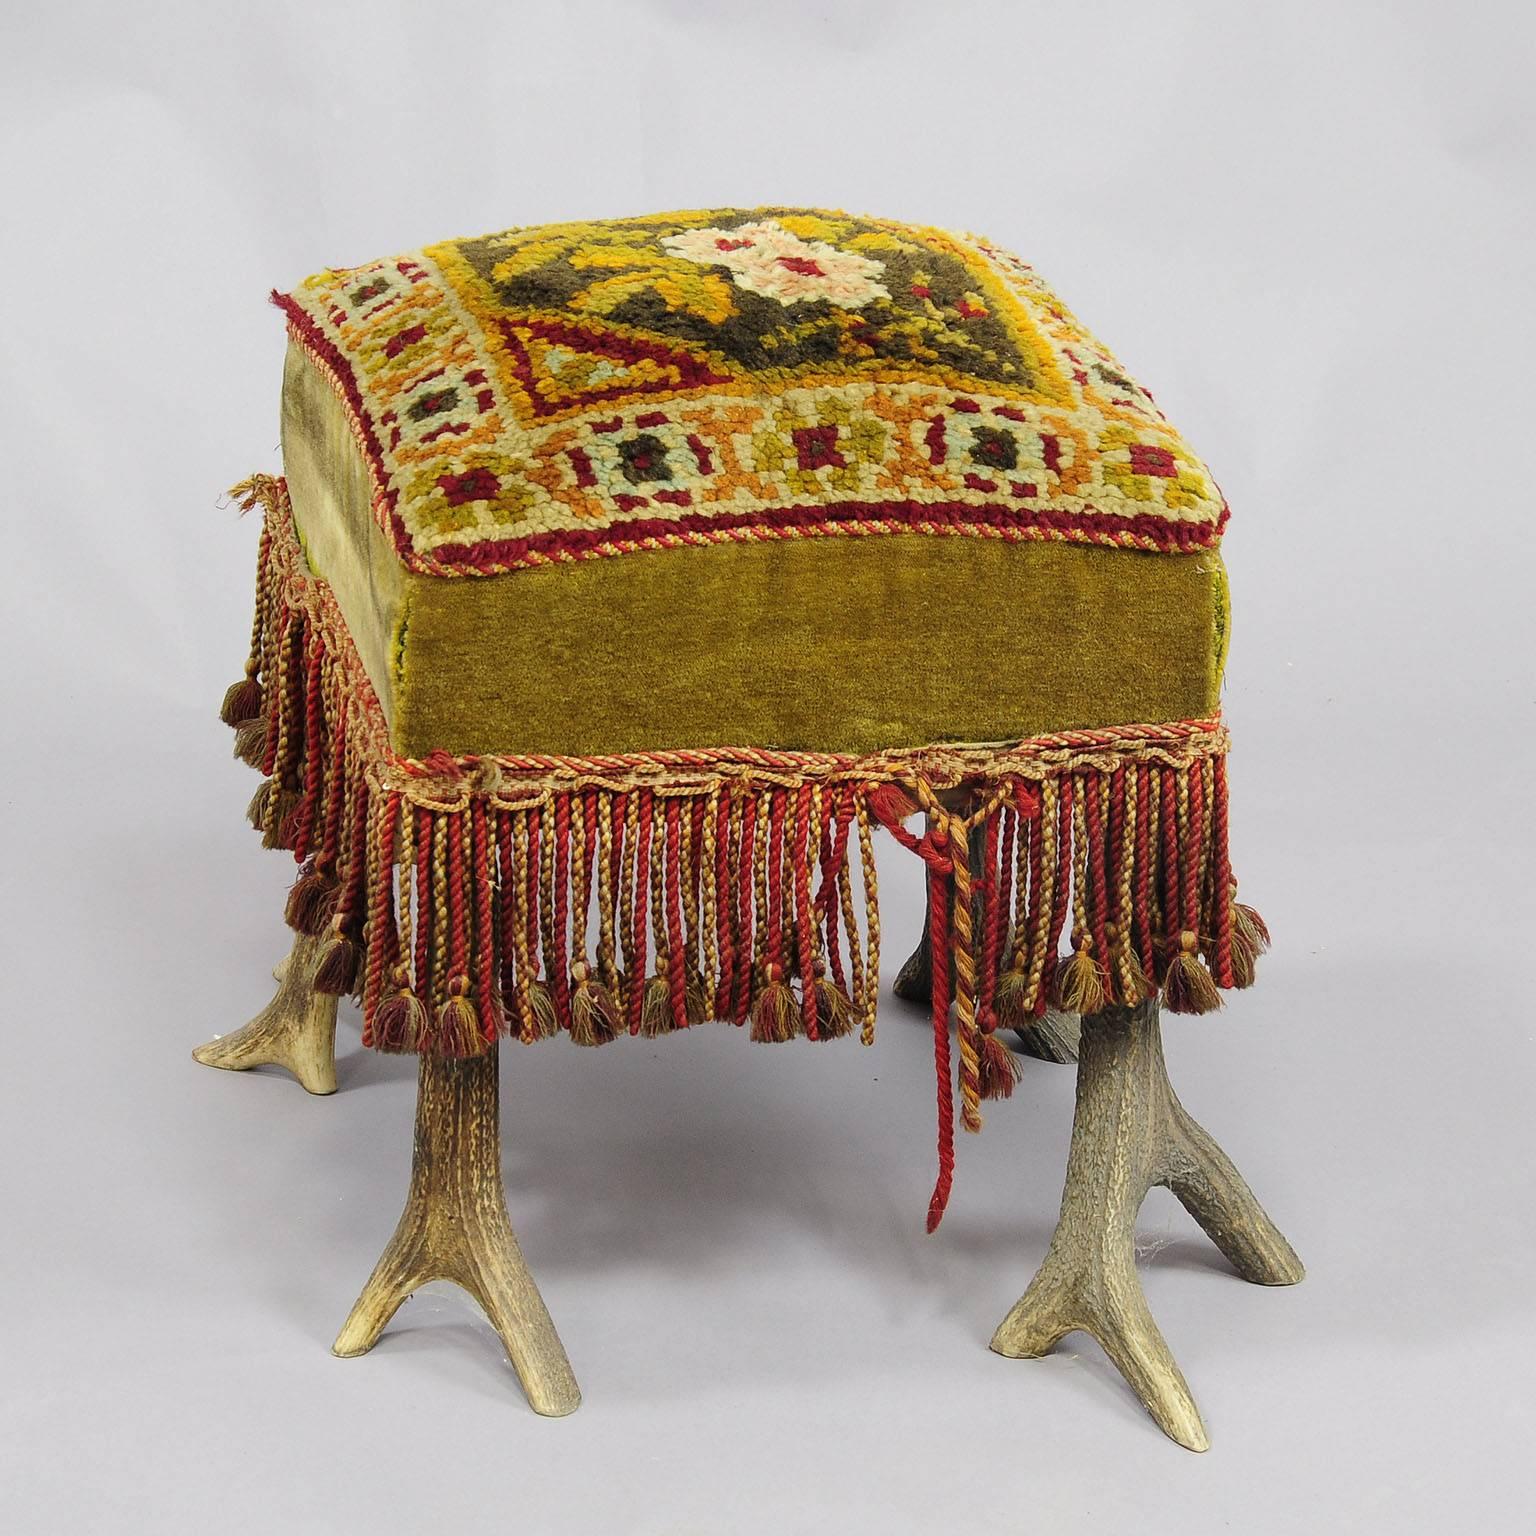 An antique antler stool with stag antlers as legs, upholstered seat with fringes.